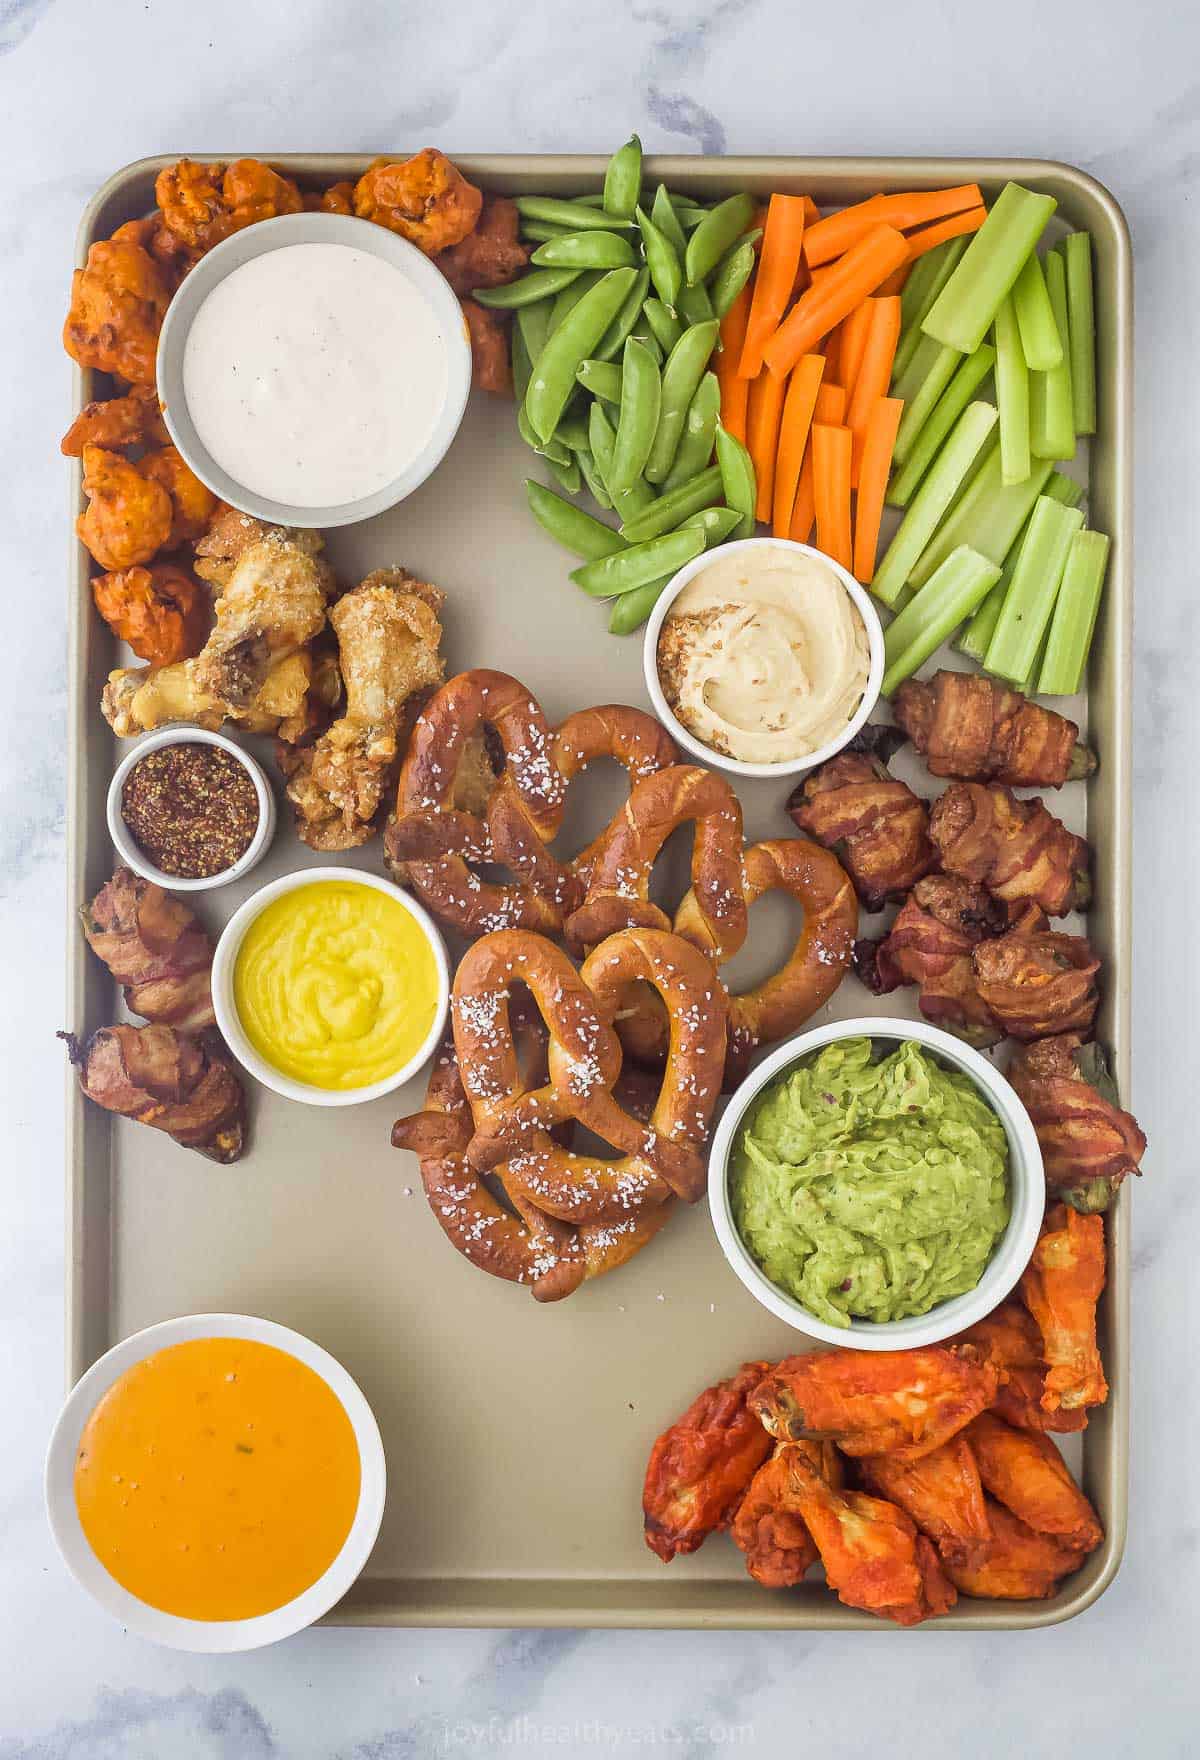 a snack platter with pretzels, chicken wings, cut up vegetables, and an assortment of dips